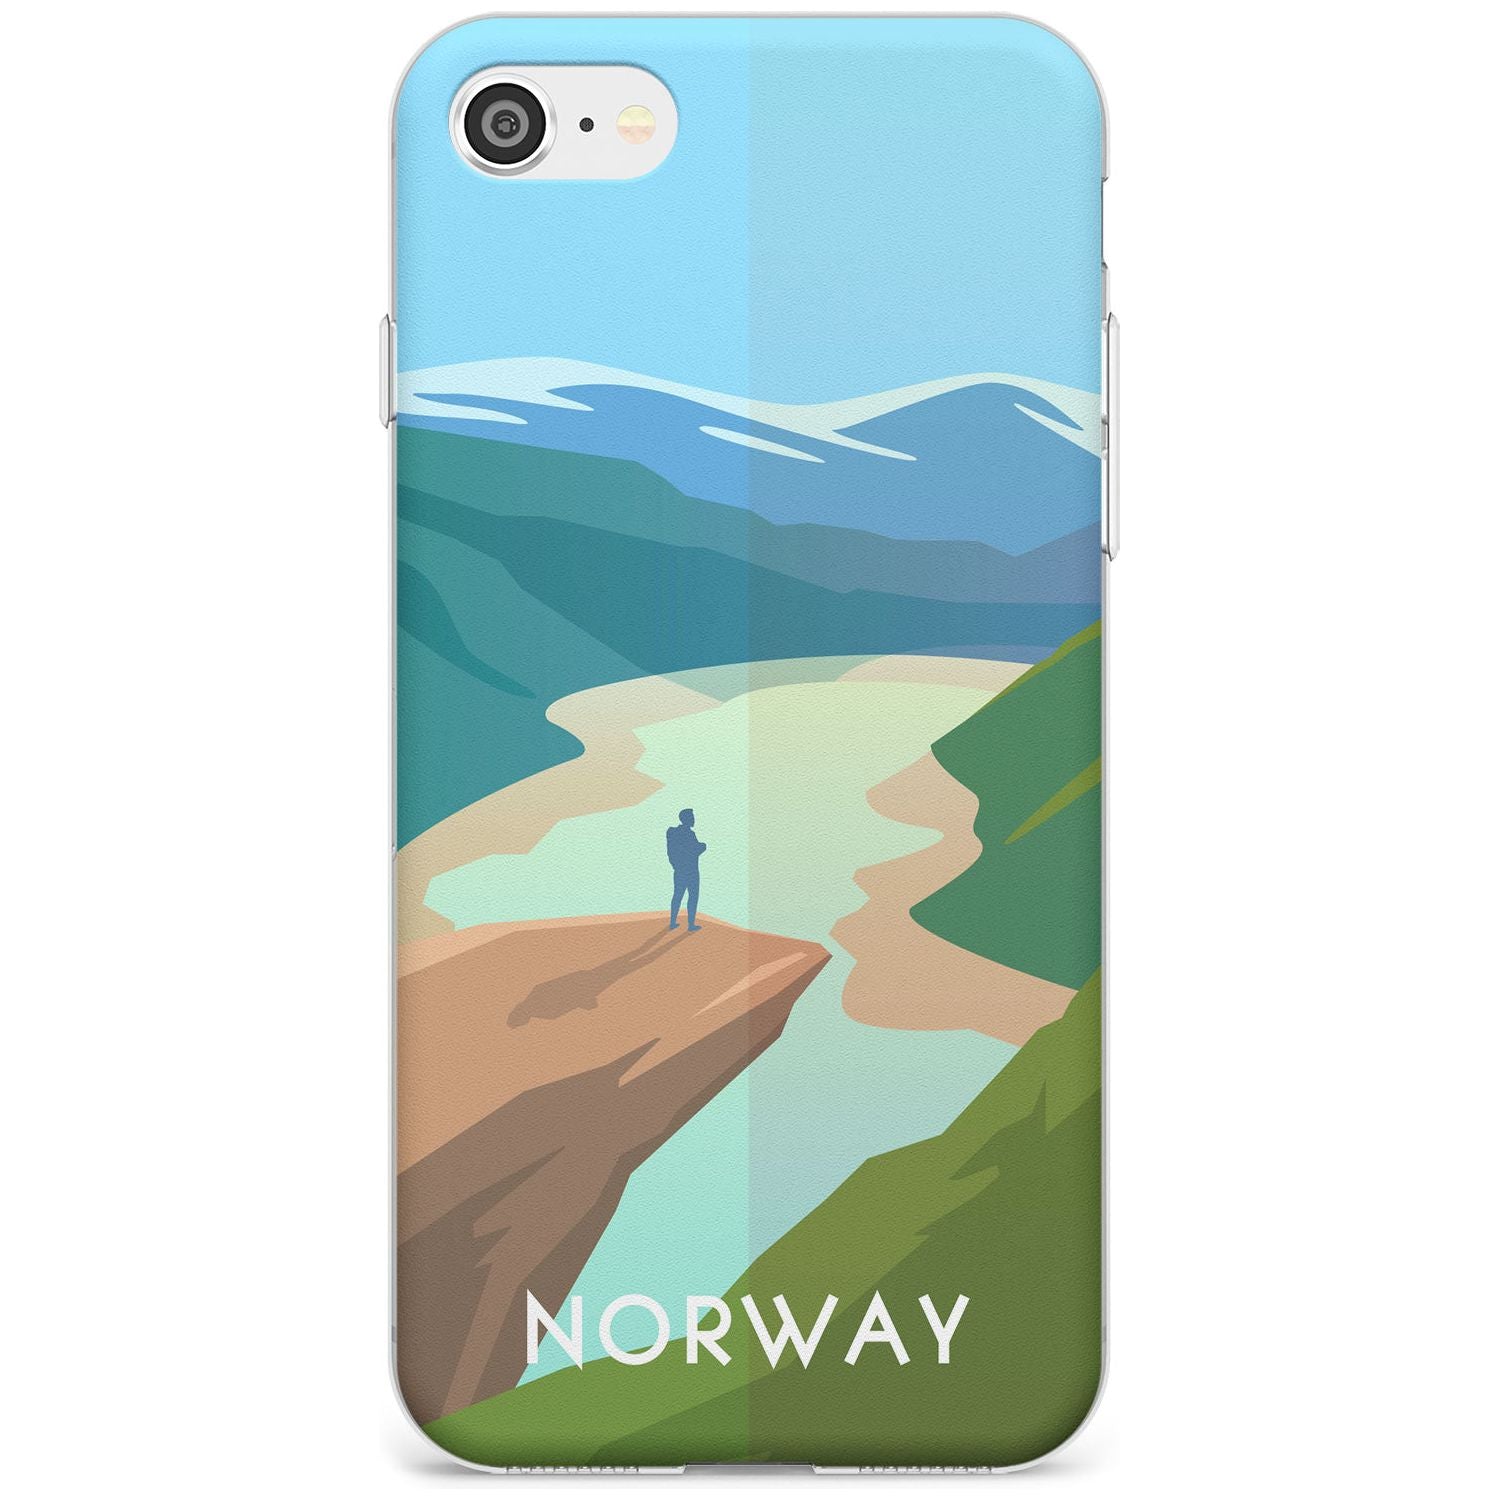 Vintage Travel Poster Norway Slim TPU Phone Case for iPhone SE 8 7 Plus